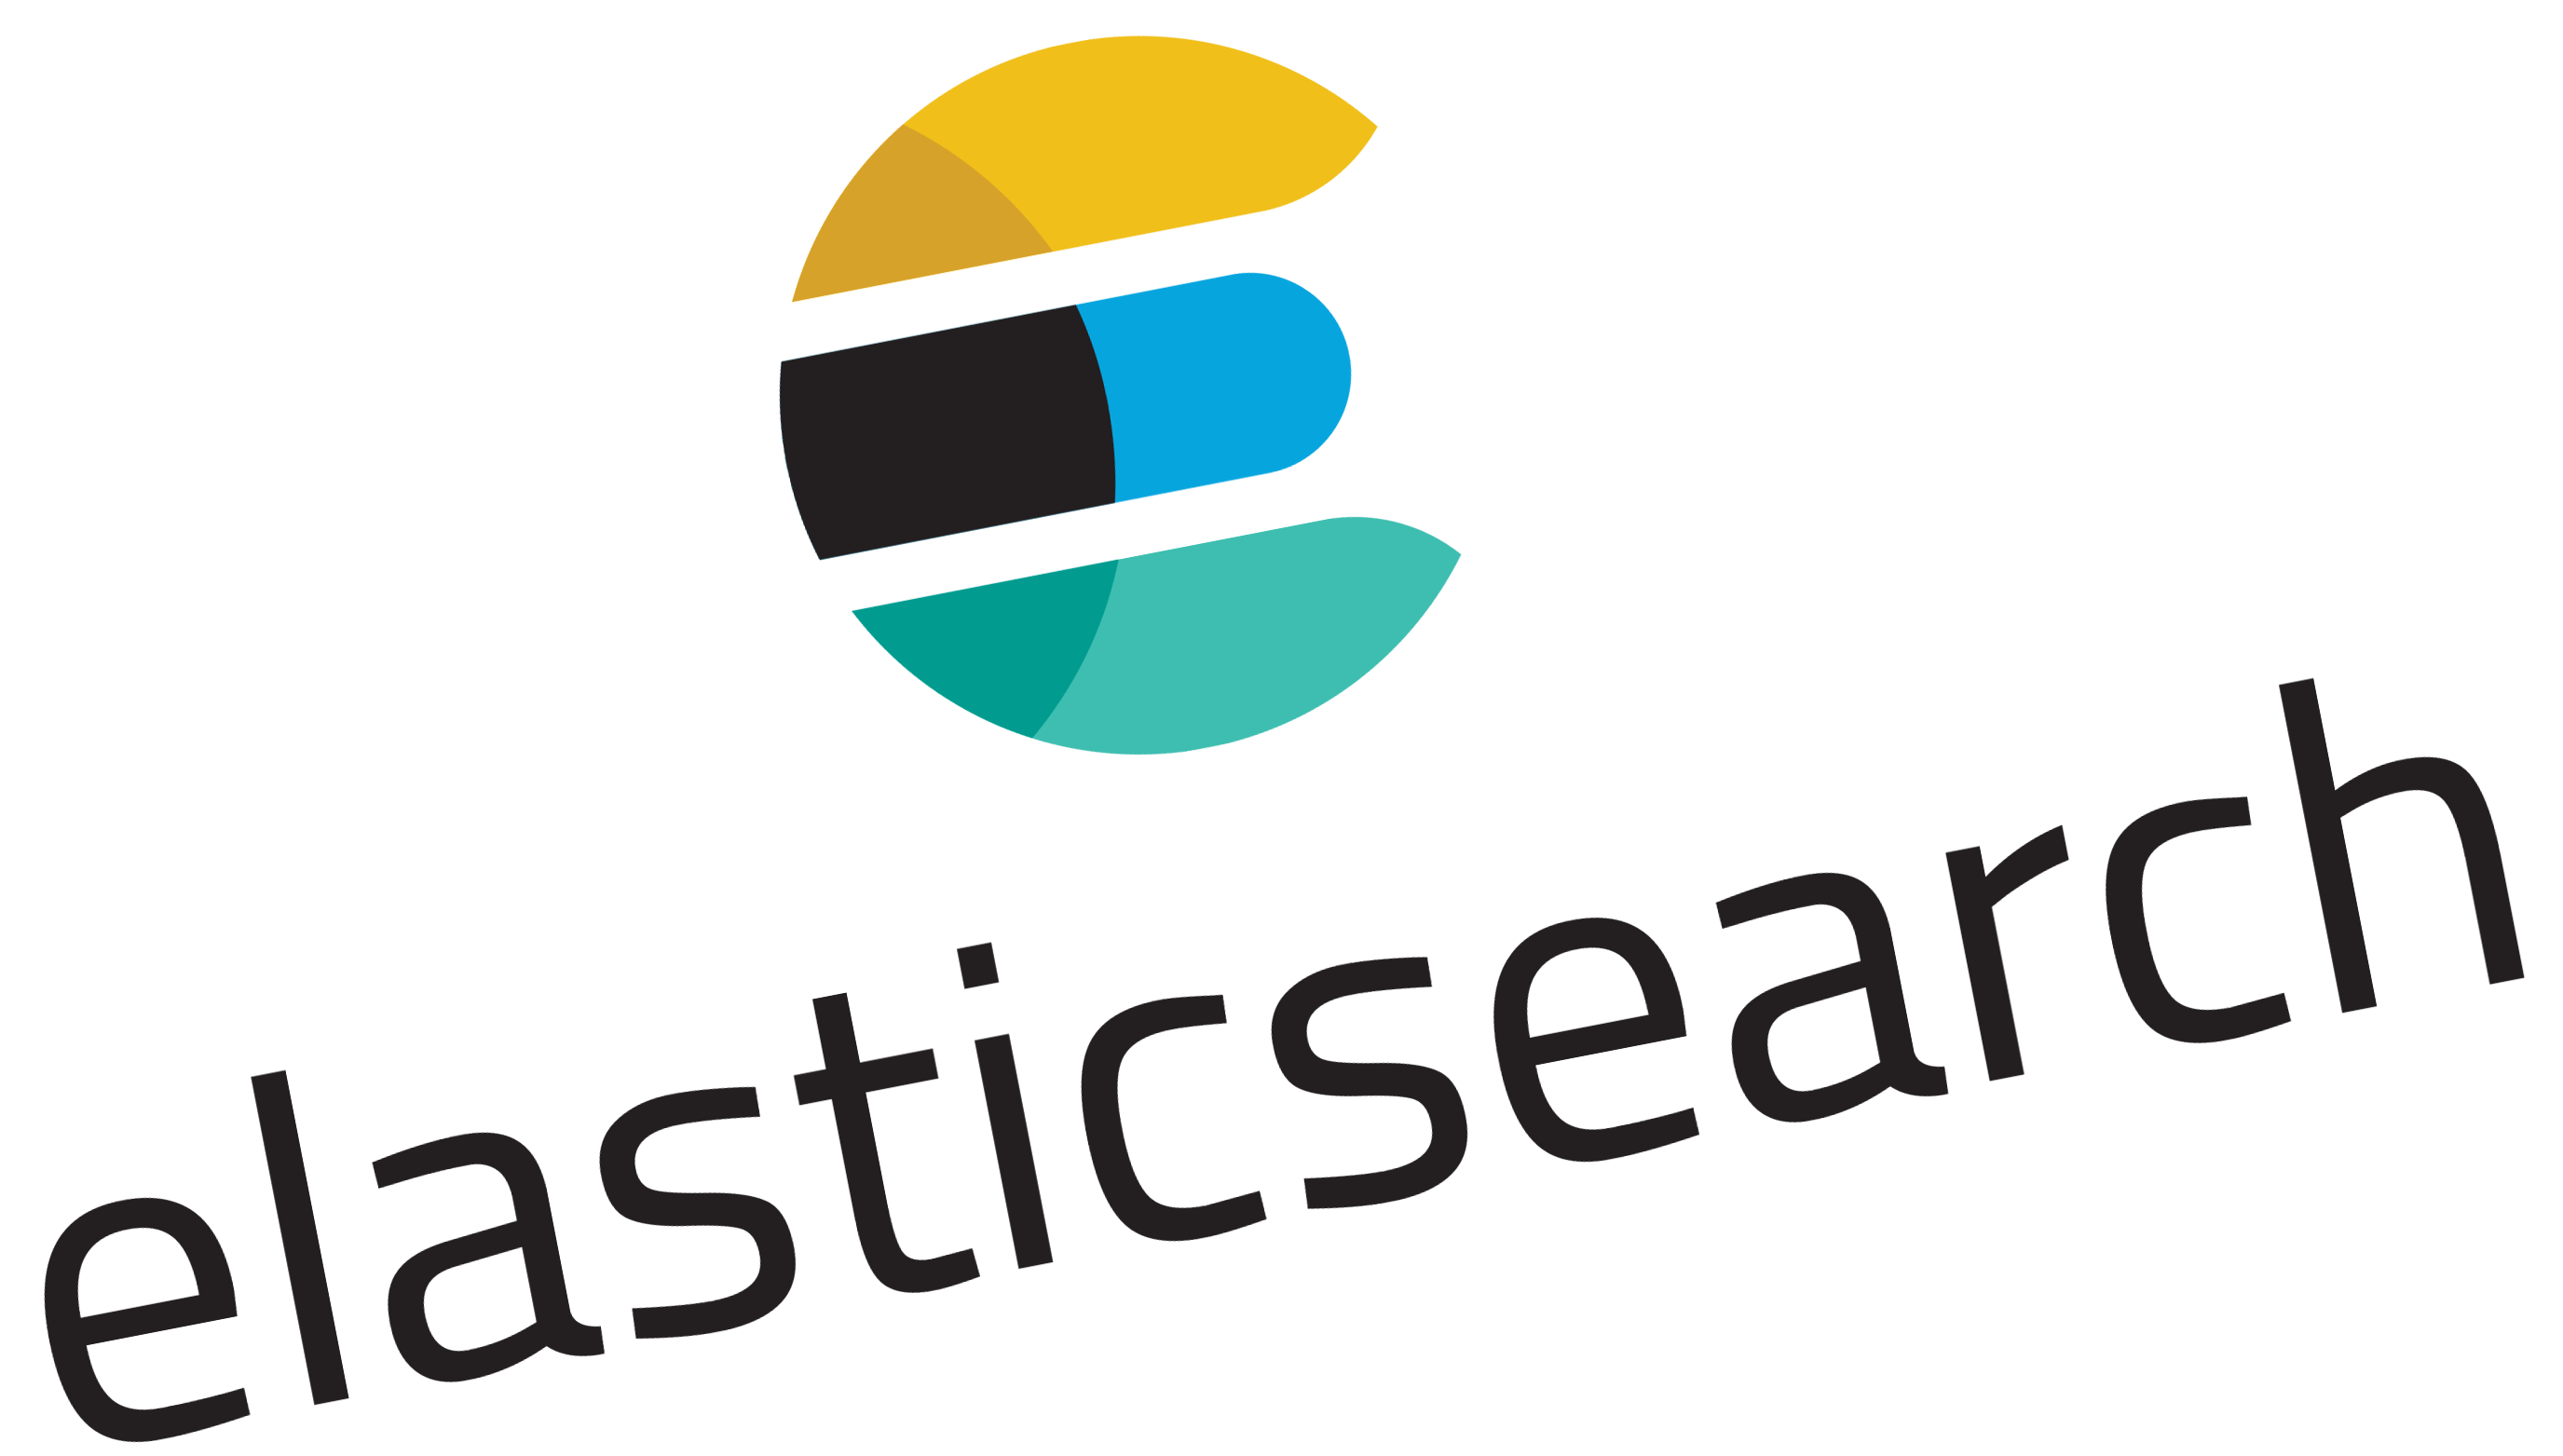 ElasticSearch Logo - Monitoring CISCO ACLs with ELK stack 5.4 (part2)